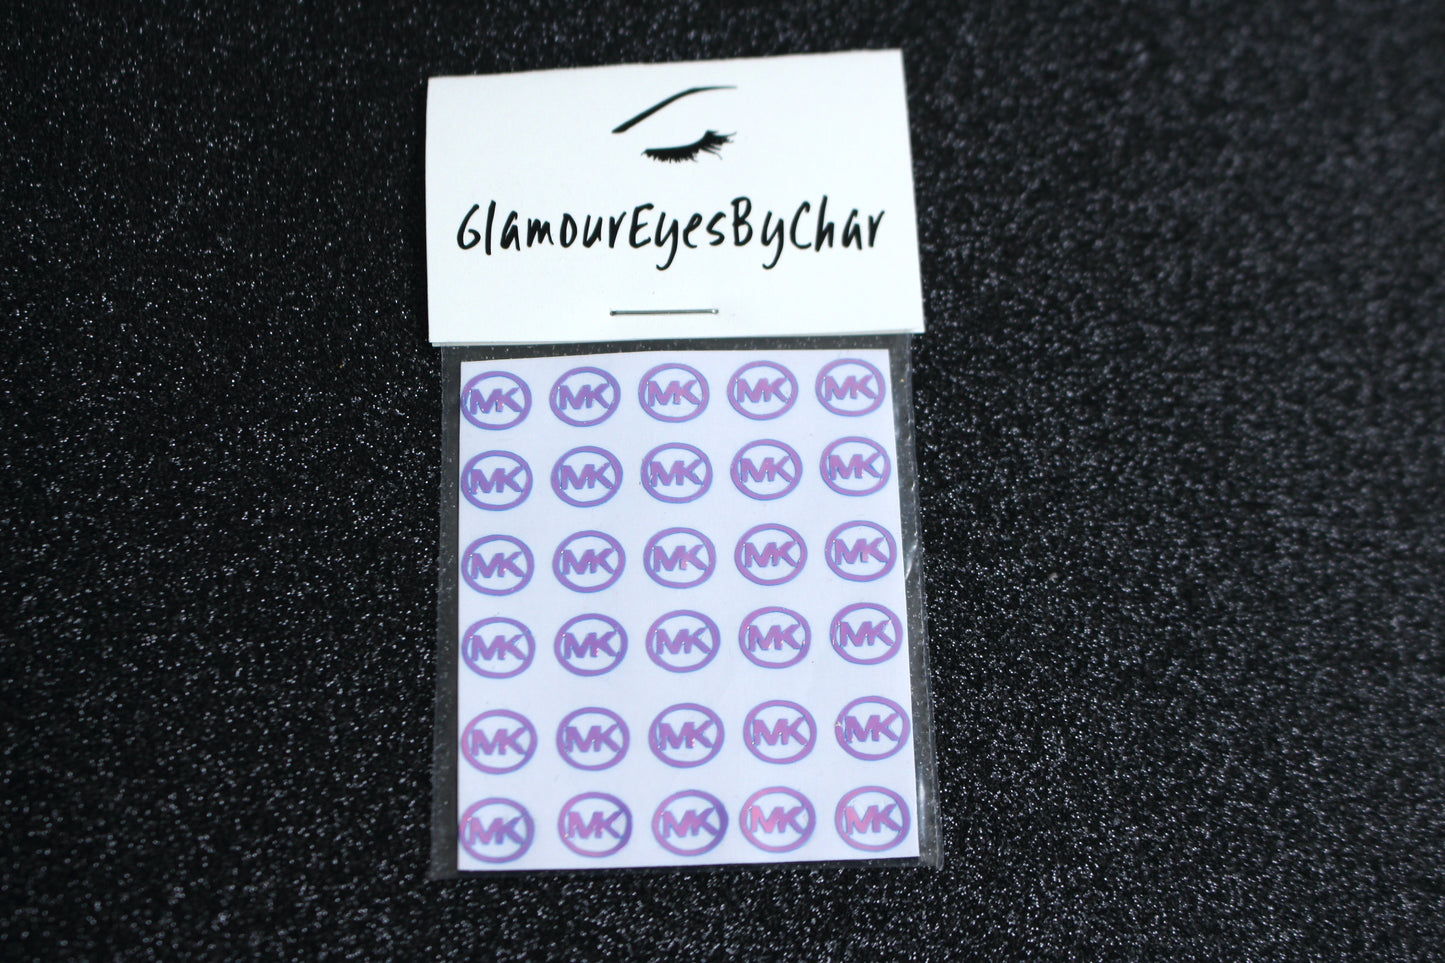 No need to go to the nail salon. Spice up your nails at home with these unique Michael Kors designer inspired nail stickers. They can be used on natural or acrylic nails. You can easily also apply them on top of regular or gel/shellac nail polish. These handmade stickers can also be used for body art or any DIY project. Each pack contains 30 stickers and is available in 5 different colours.  Tip: Apply some of our glitter on your nails to really GLAMOUREYES your look.